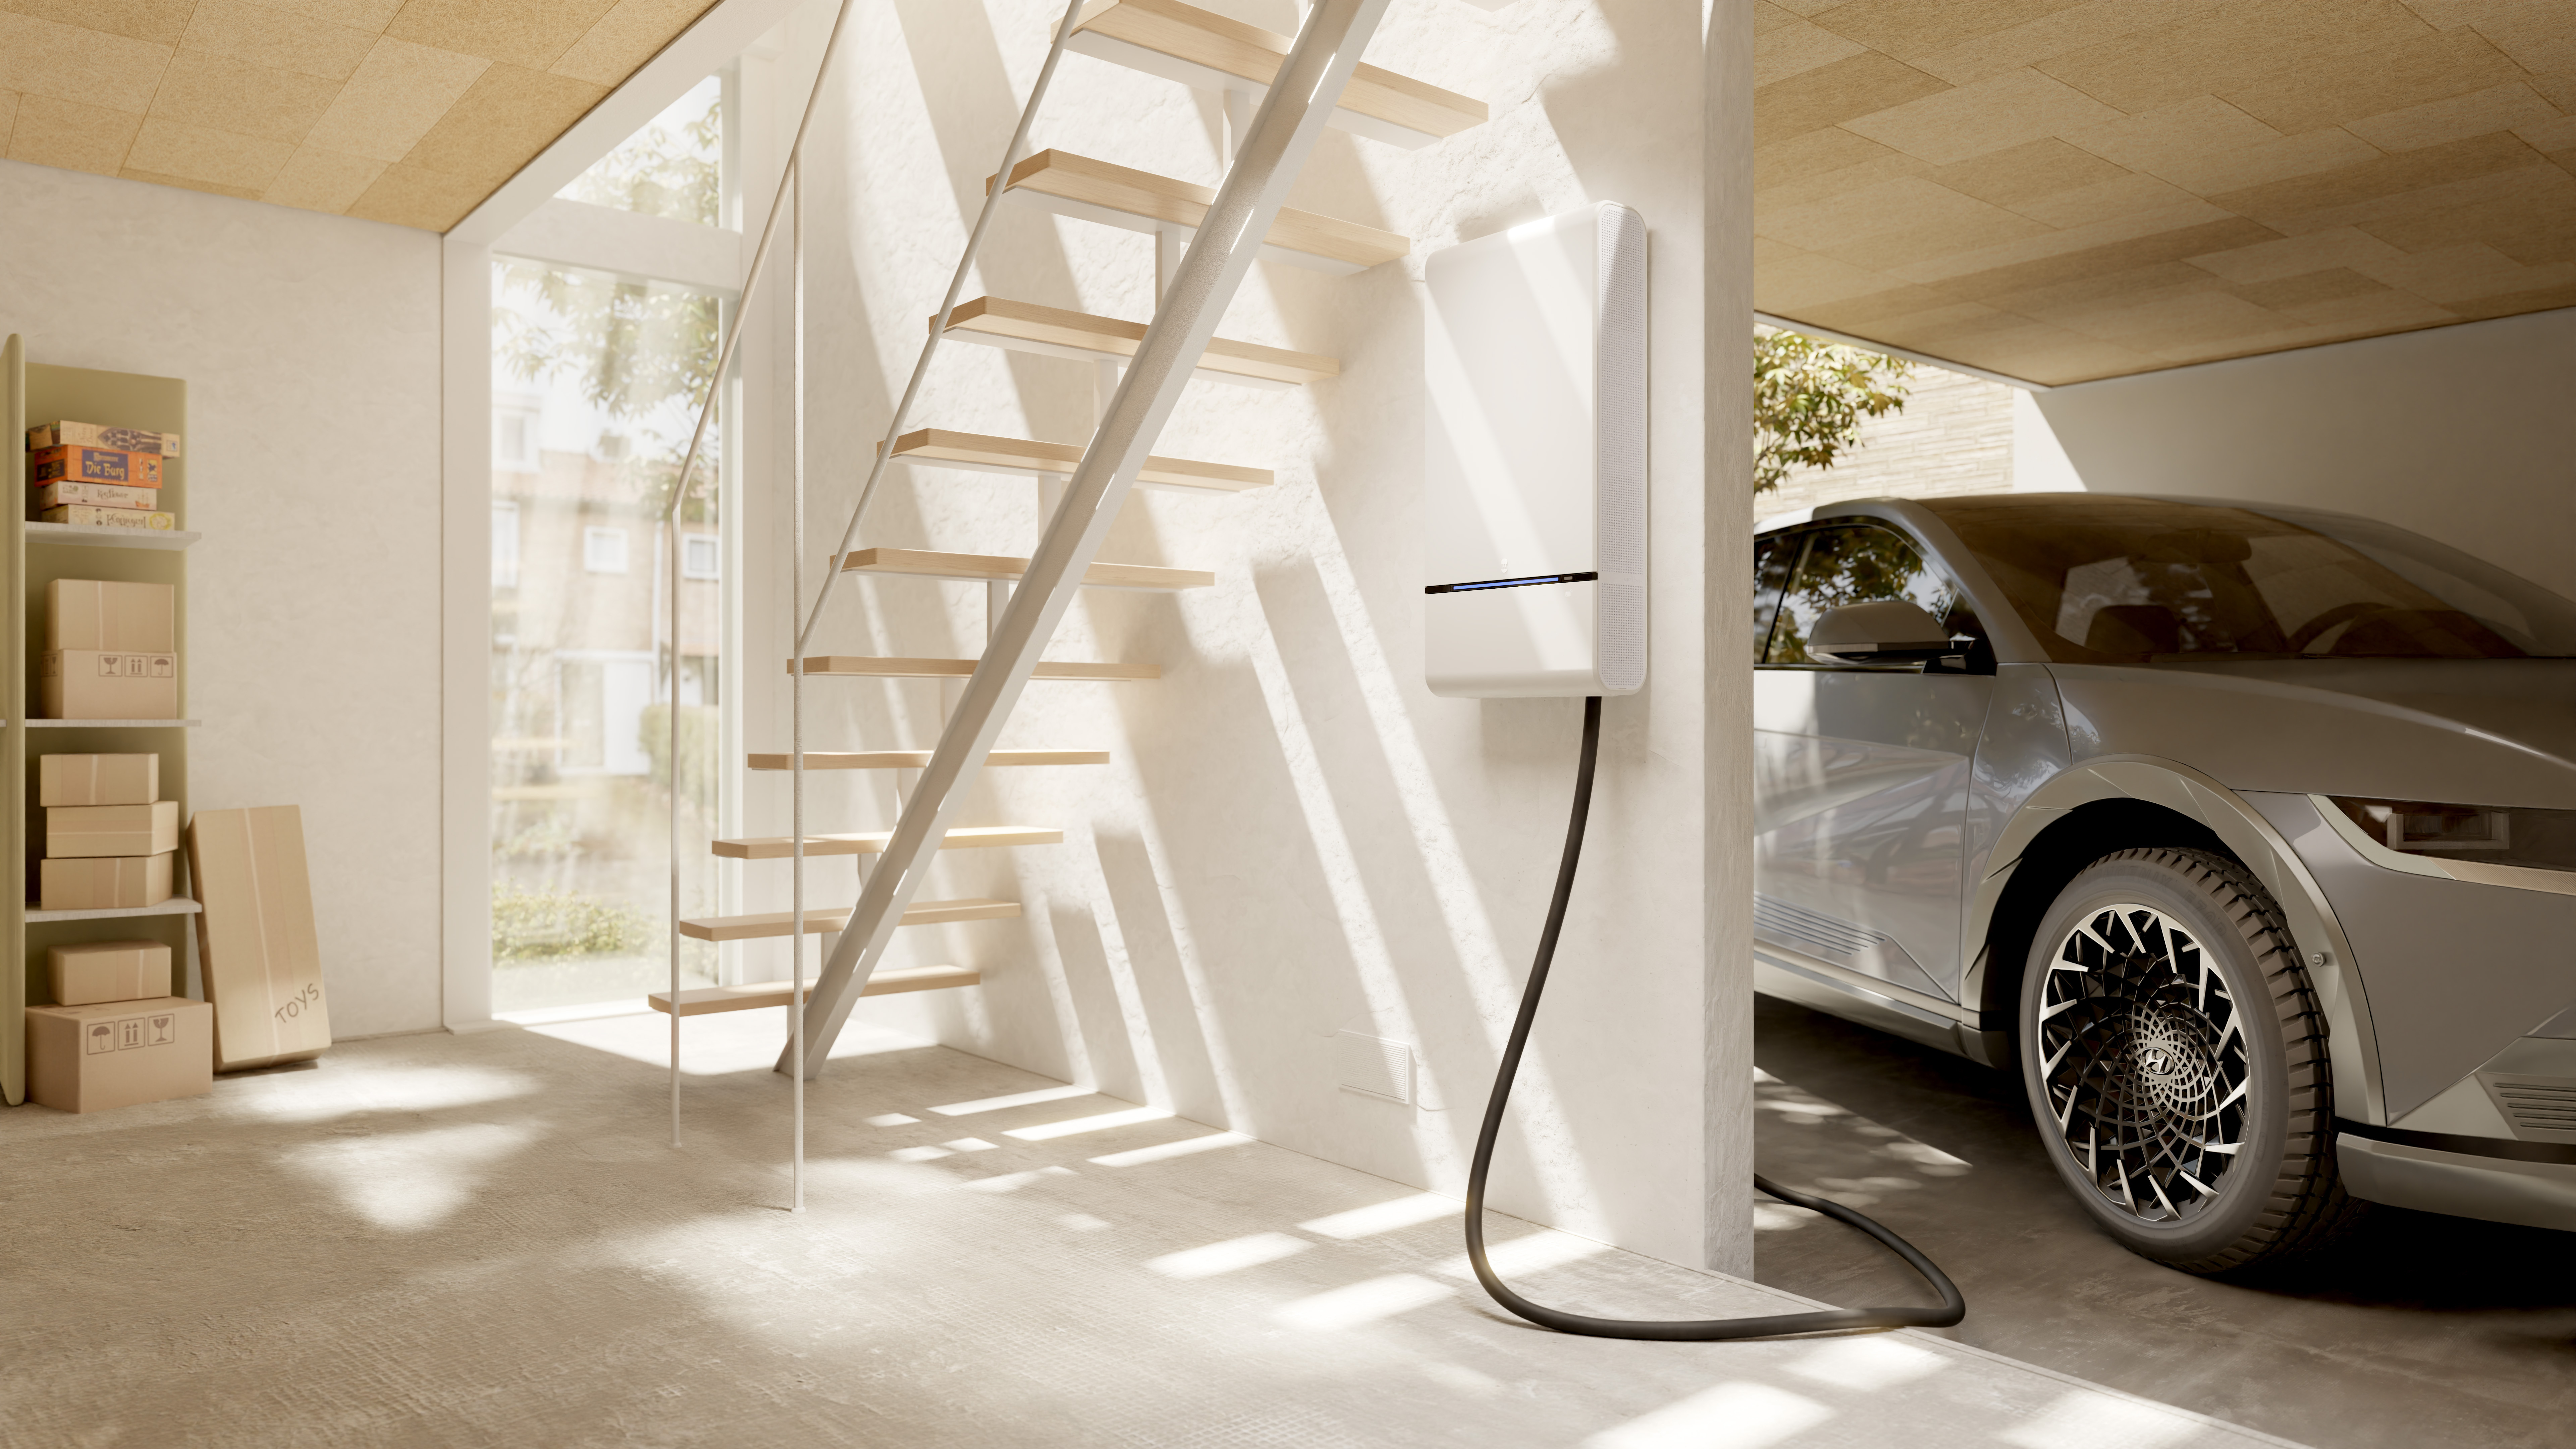 Wallbox Announces its Latest Bidirectional EV Charger, Quasar 2, has  Confirmed Compatibility with CUPRA BORN 77kWh